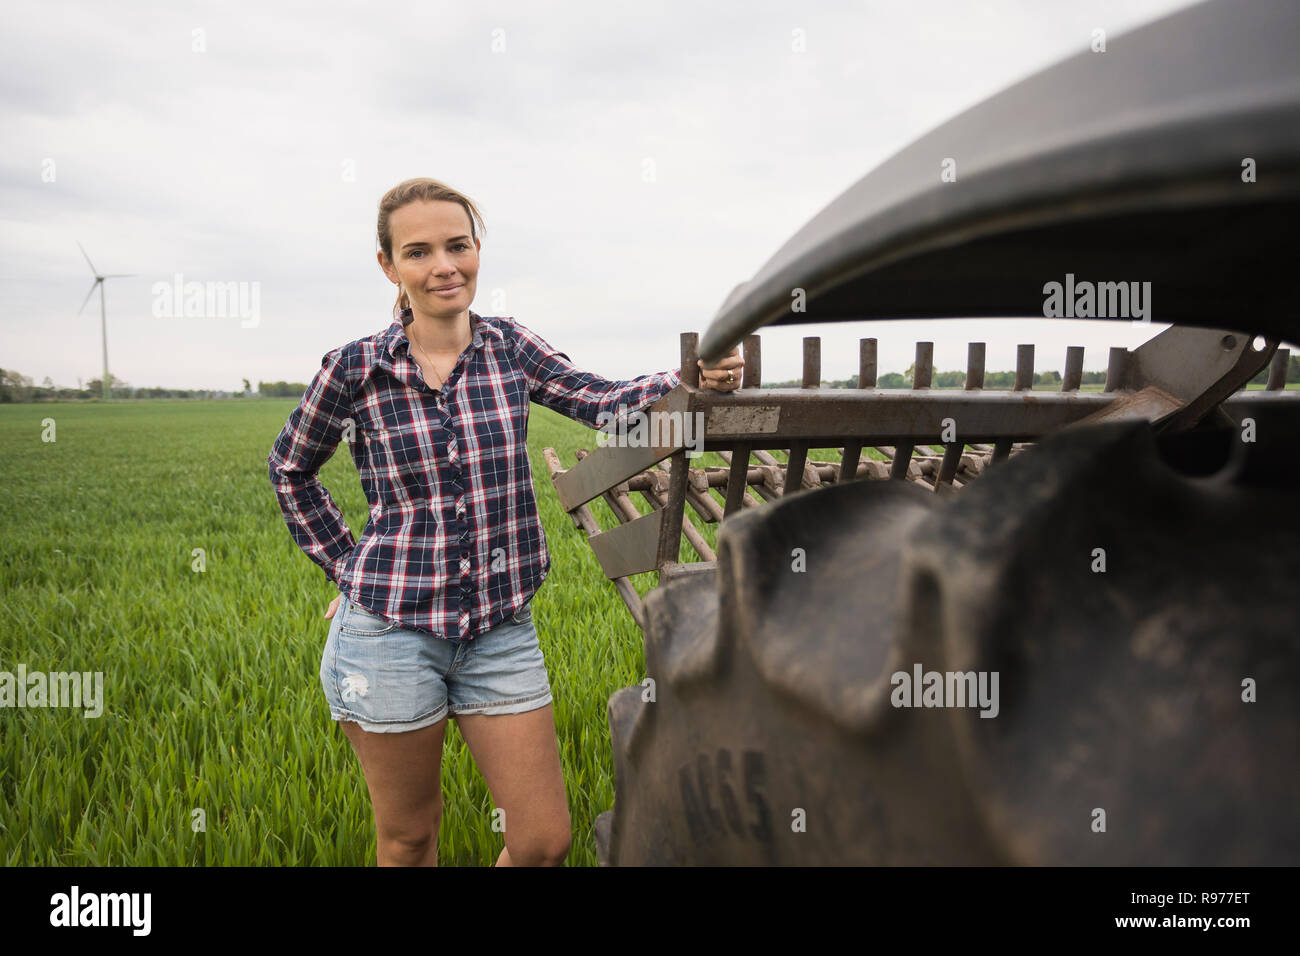 Agricultural worker standing next to a tractor in field Stock Photo